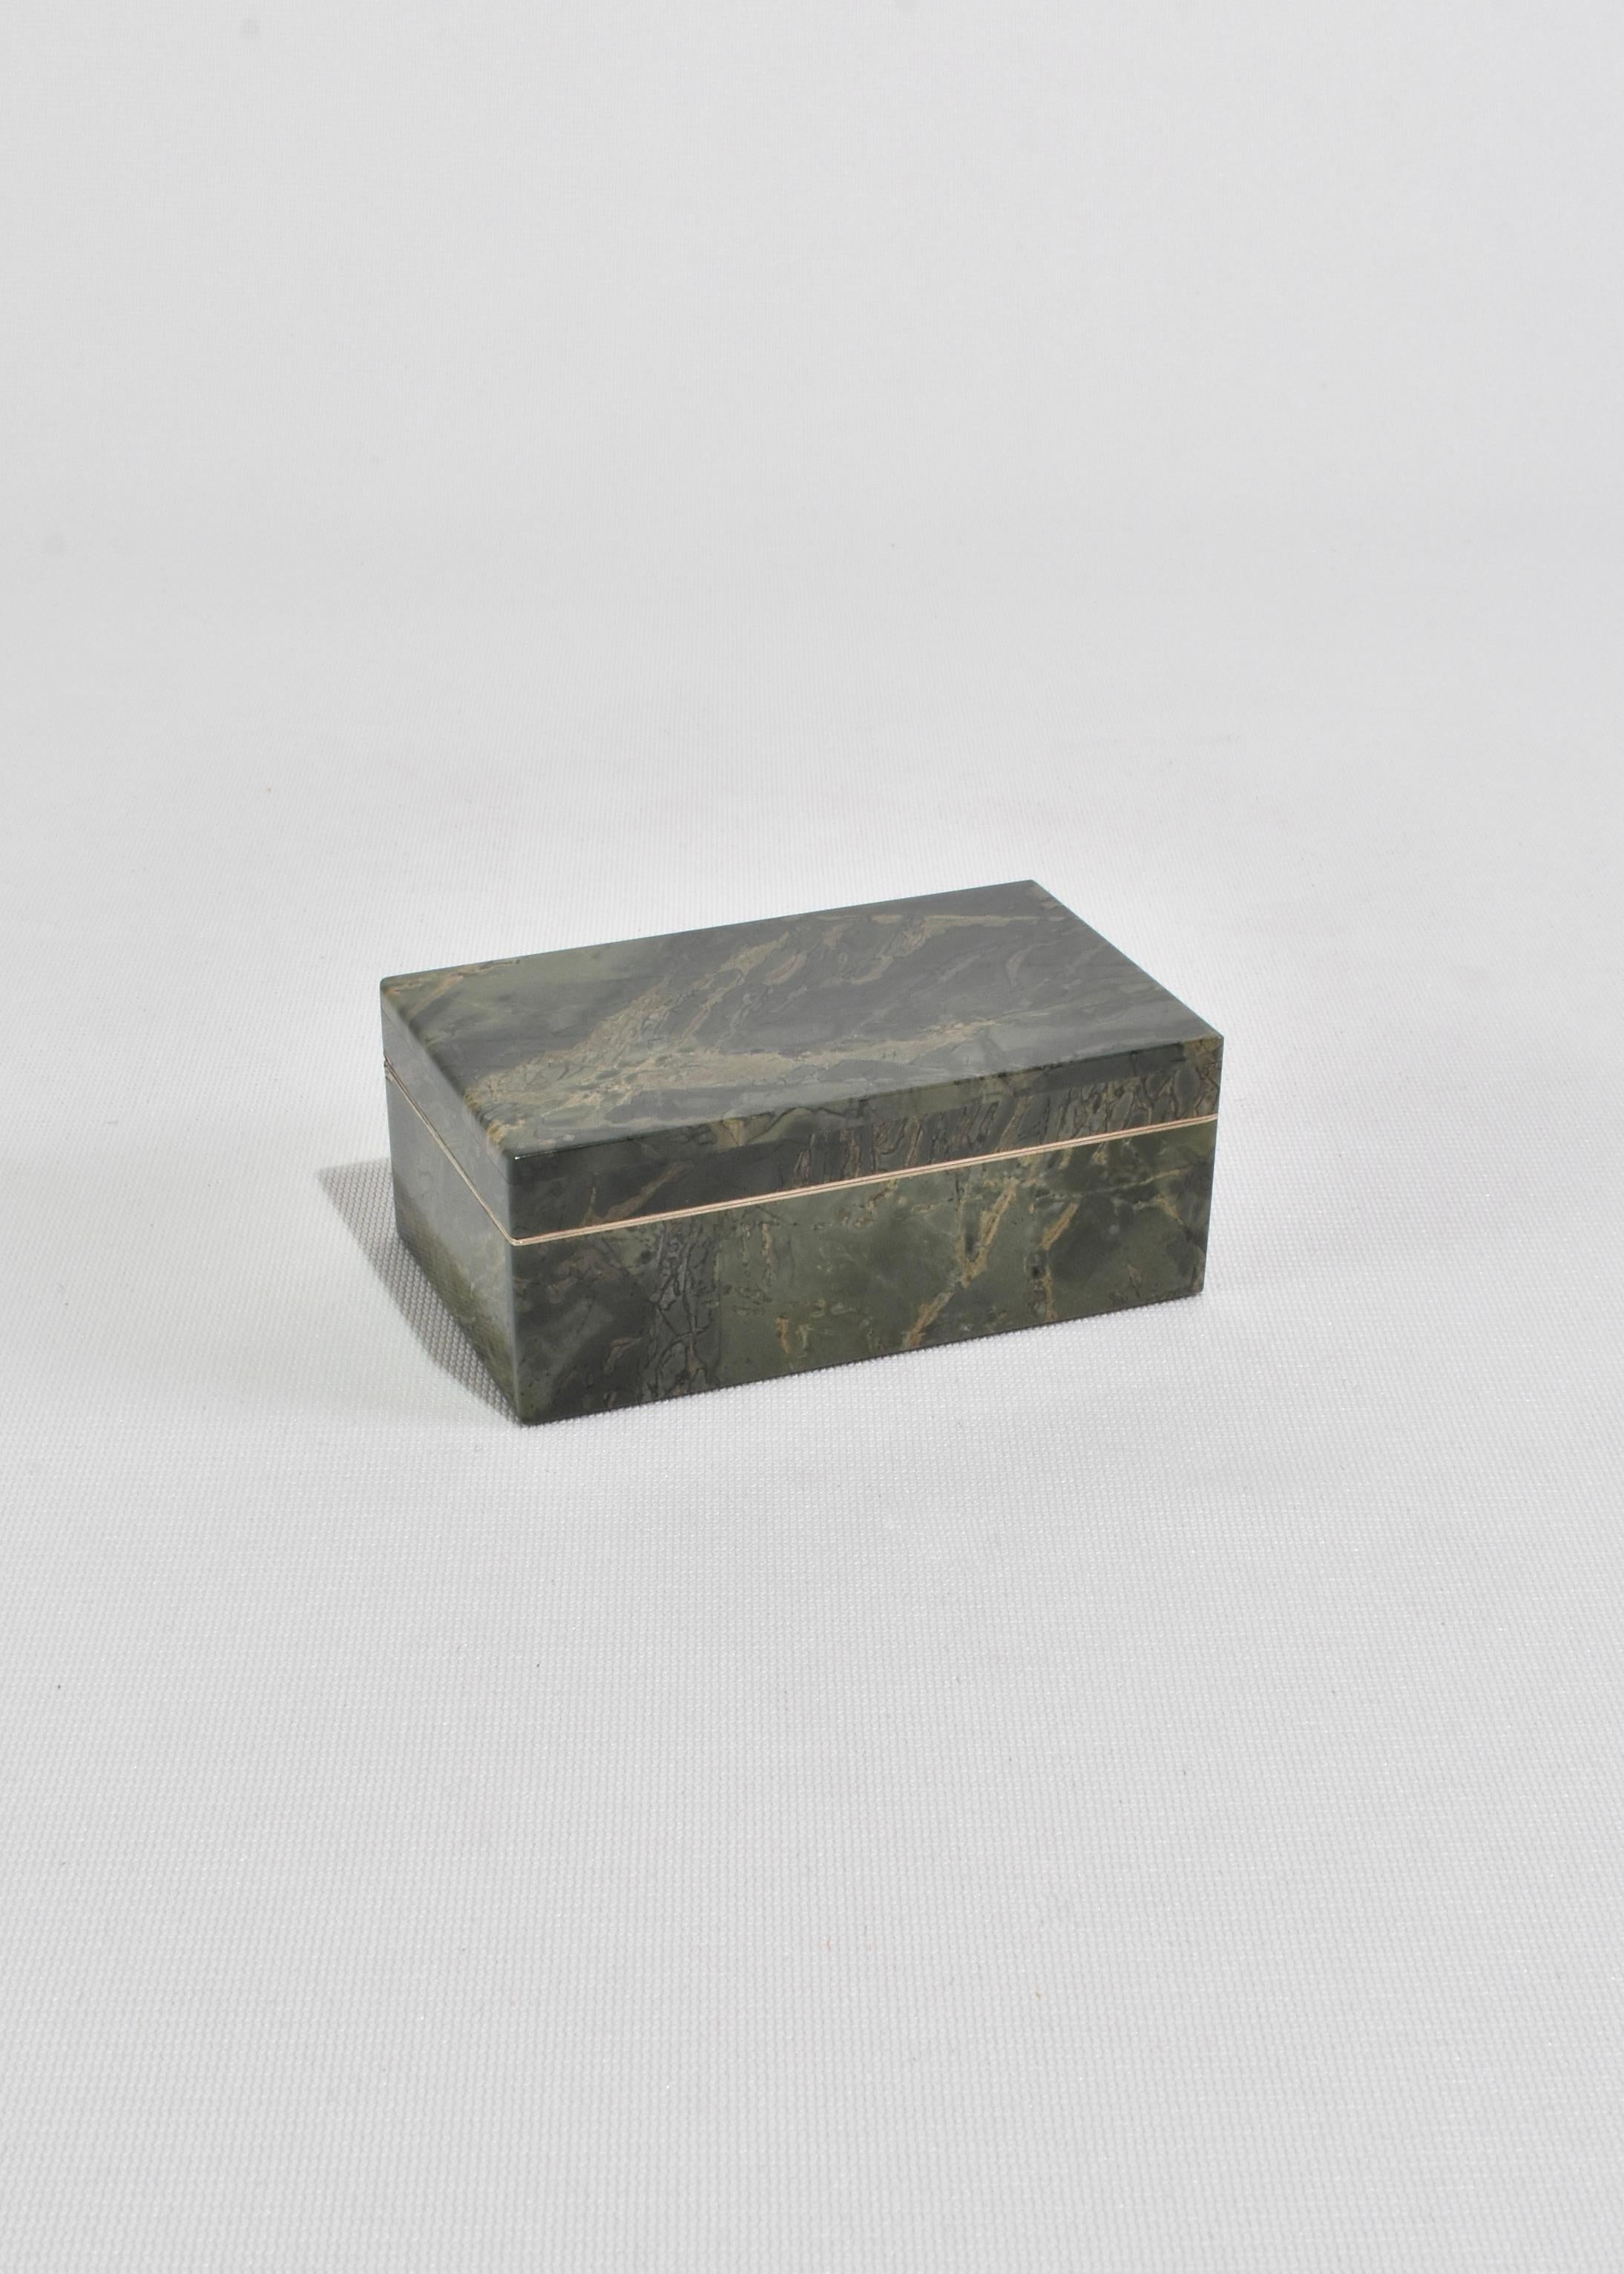 Hand-Crafted Green Stone Jewelry Box For Sale